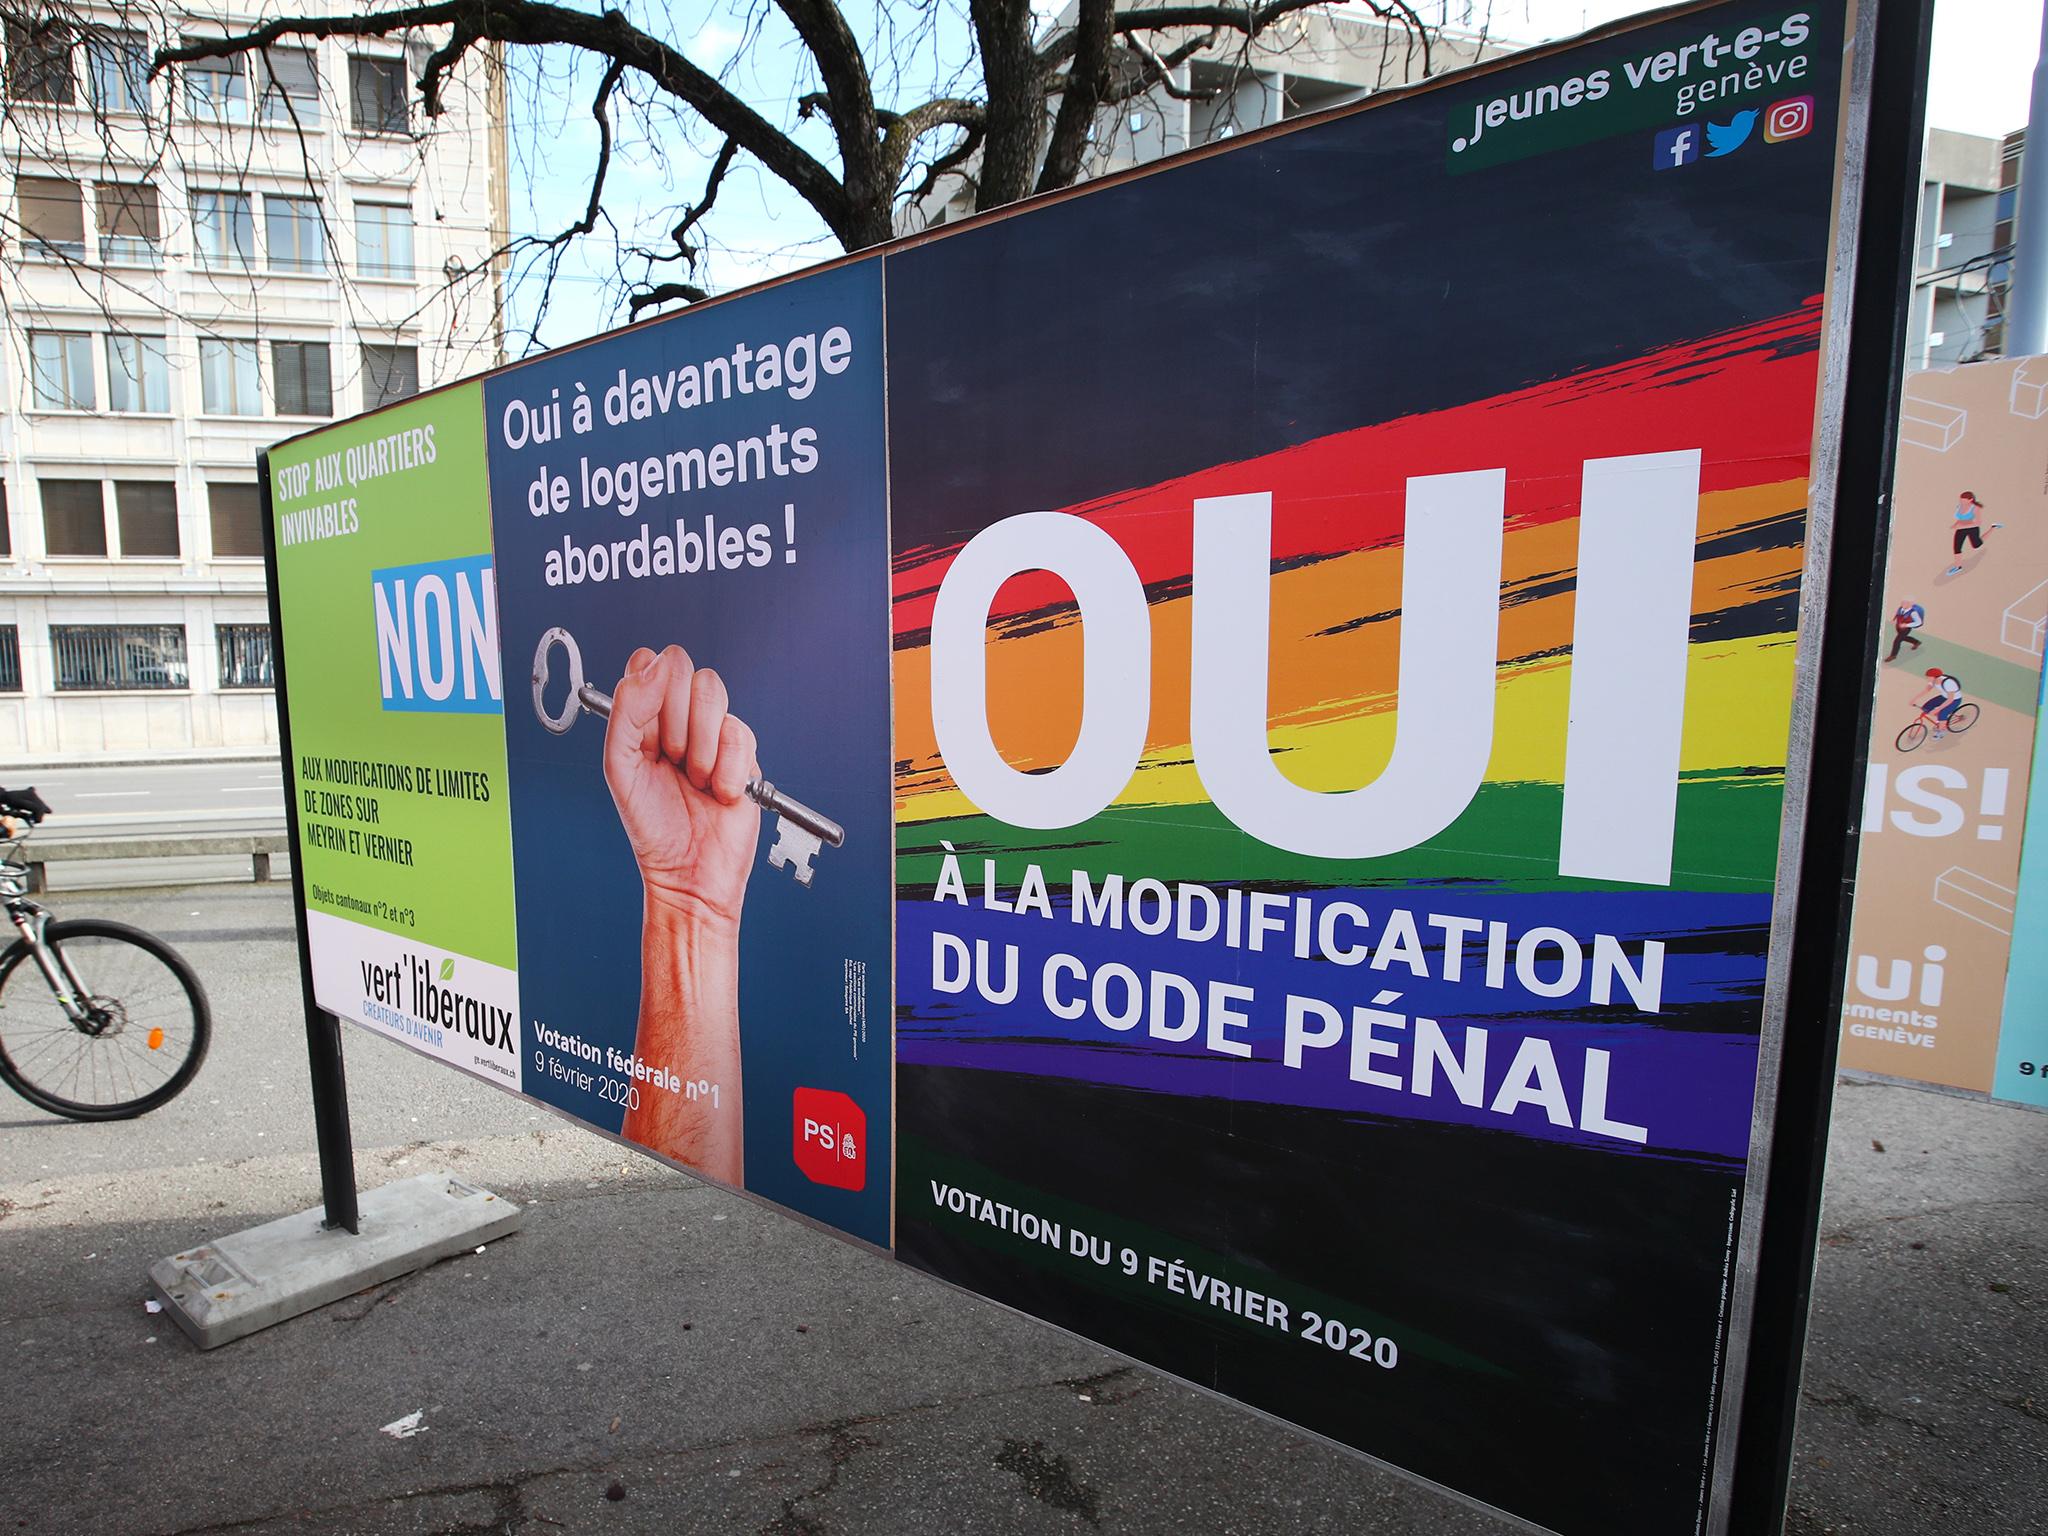 The ballot will ask voters whether or not to confirm an 'anti-homophobia' law that has the approval of the Swiss parliament